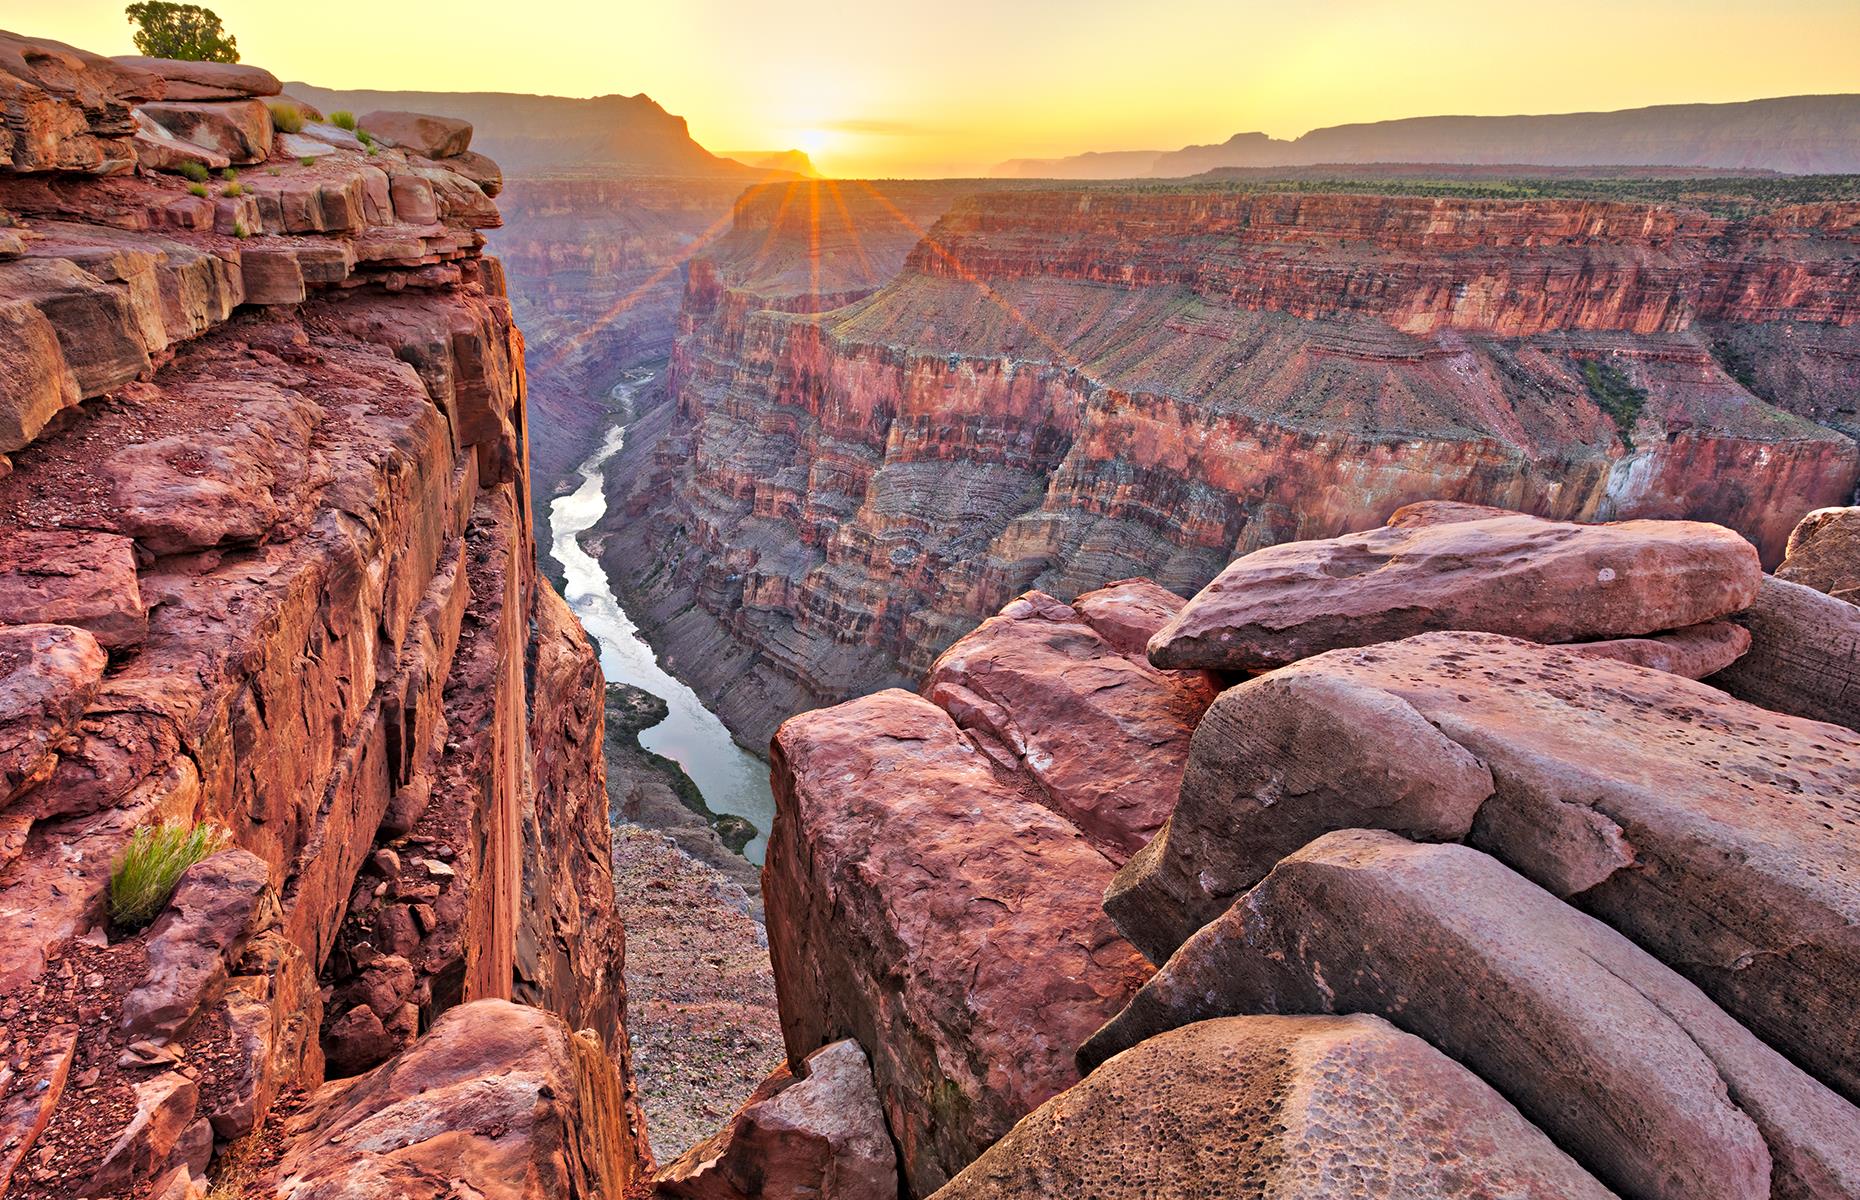 The Grand Canyon is a dramatic sight whichever way you look at it. But going inside the canyon gives you the chance to appreciate just how deep and dramatic it is, as you paddle your way along the Colorado River.